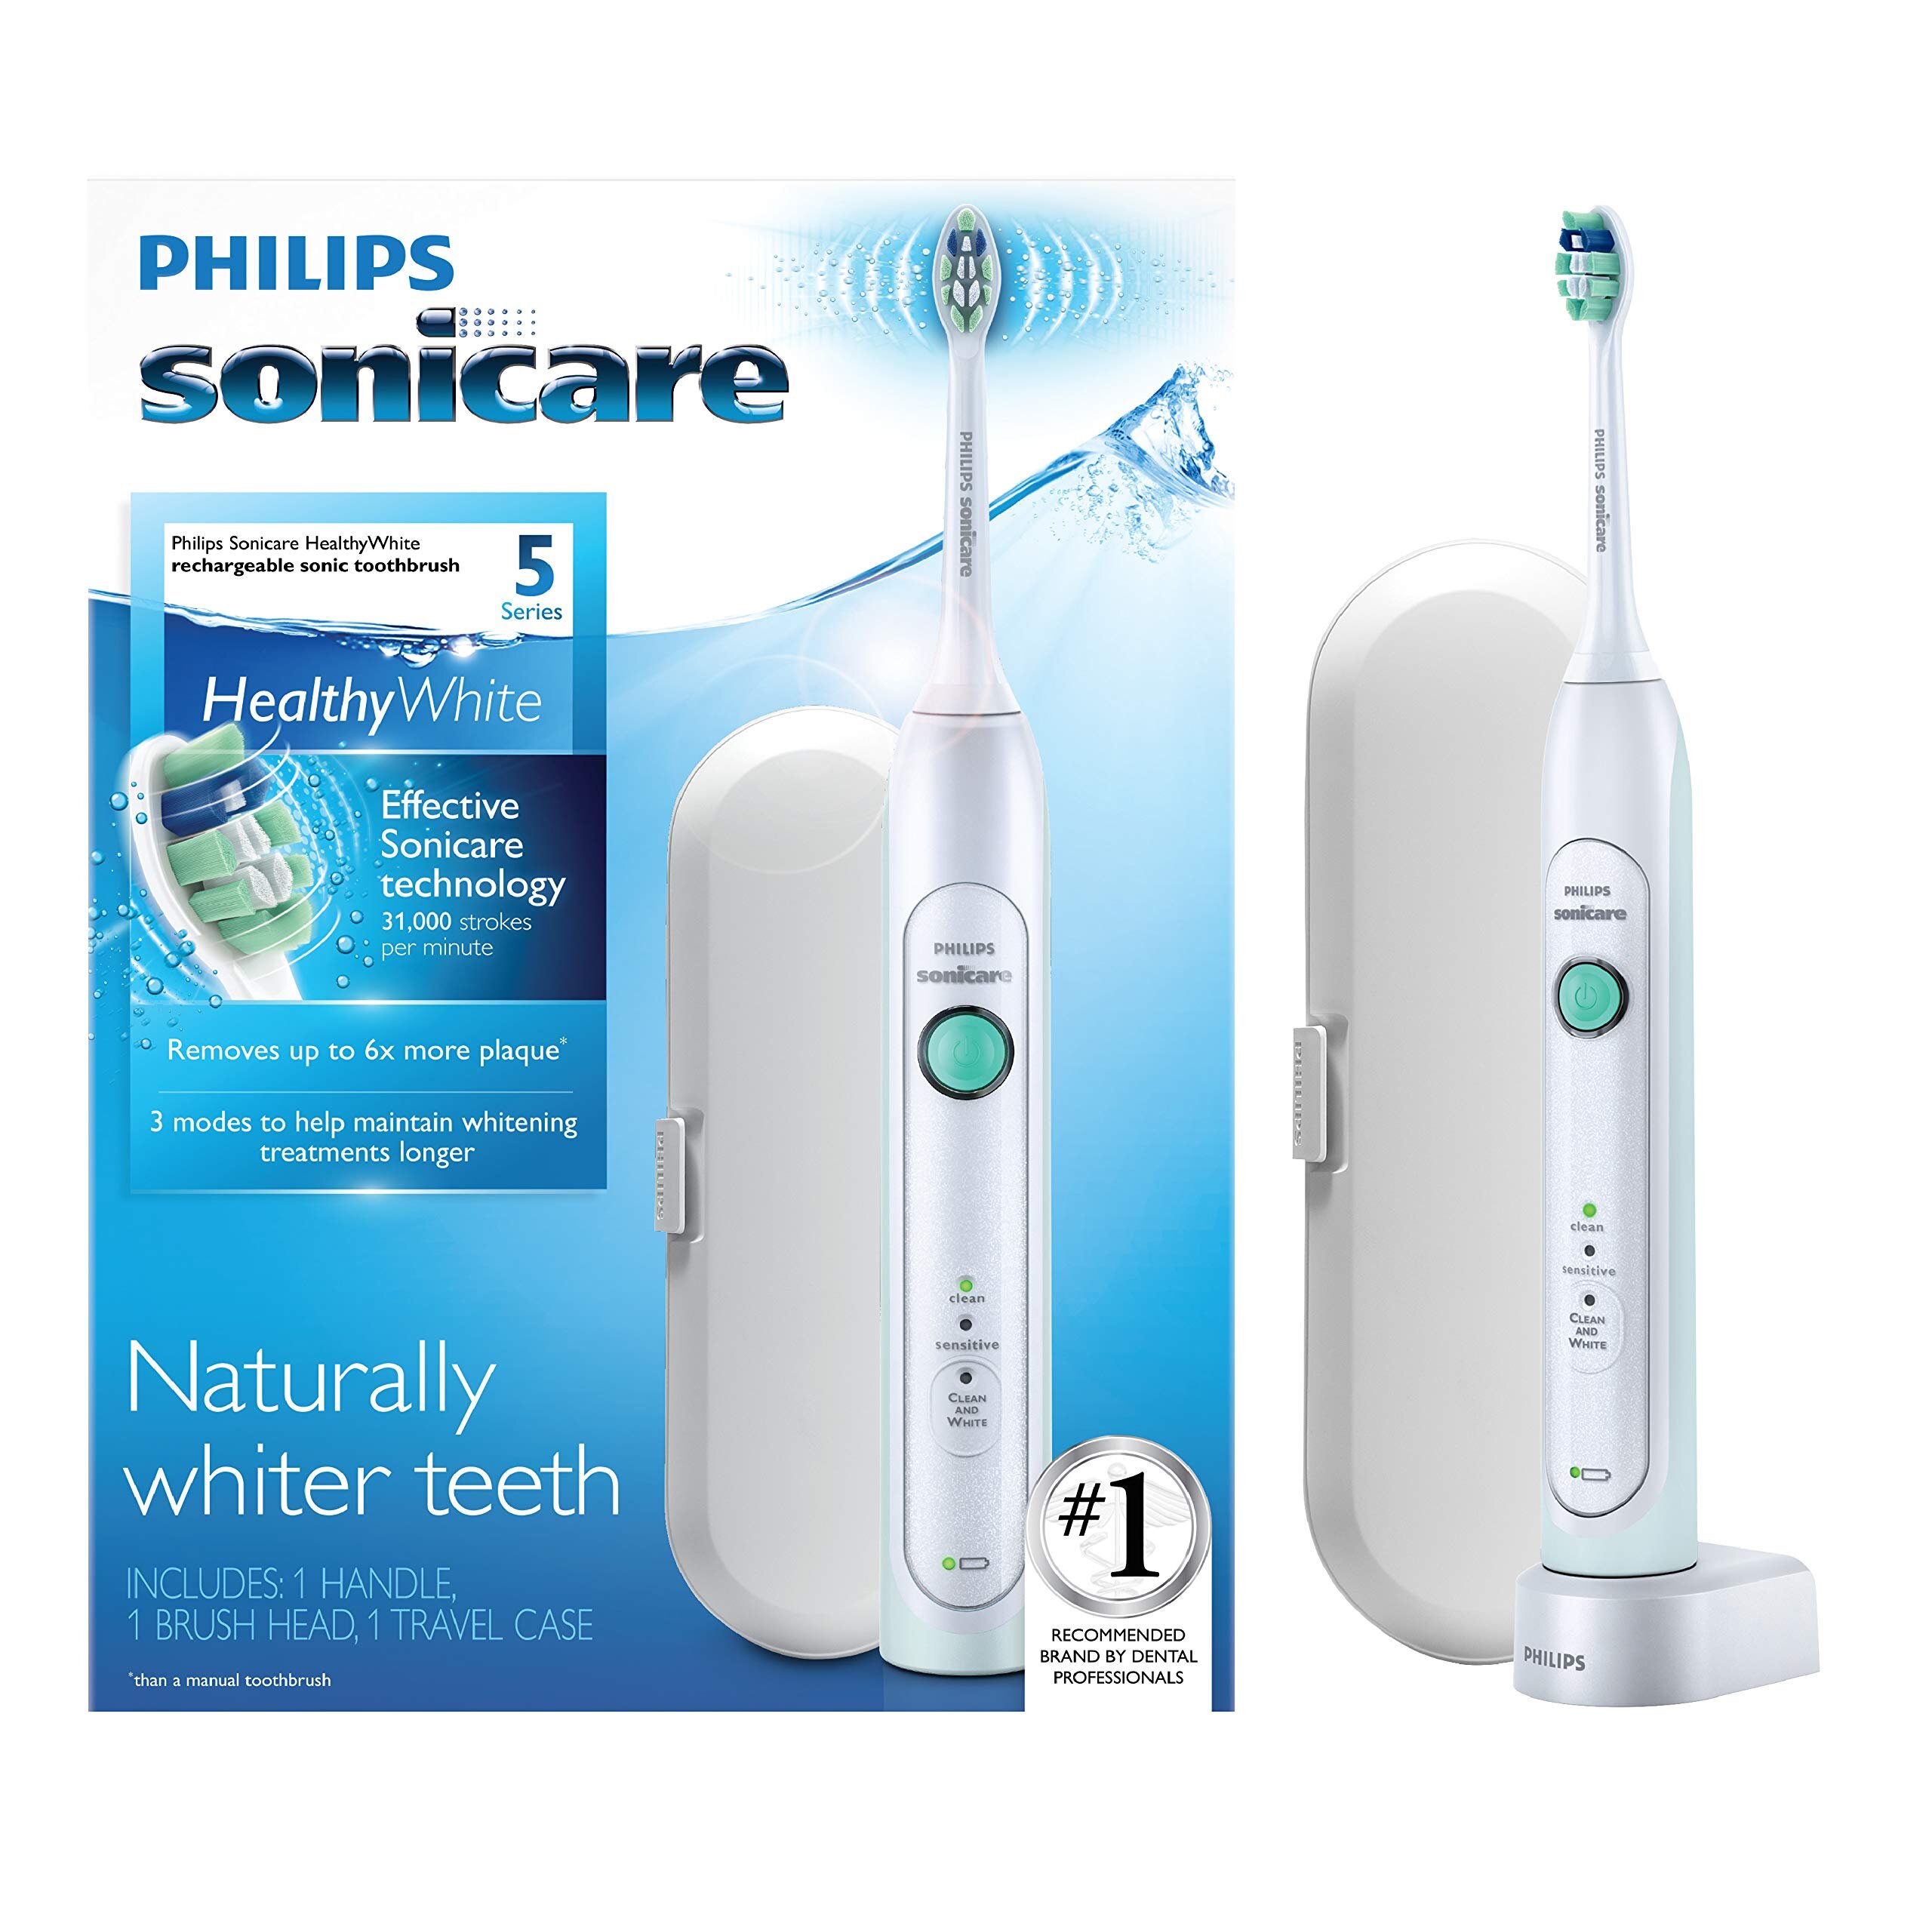 Philips Sonicare 5 Series Healthy White 